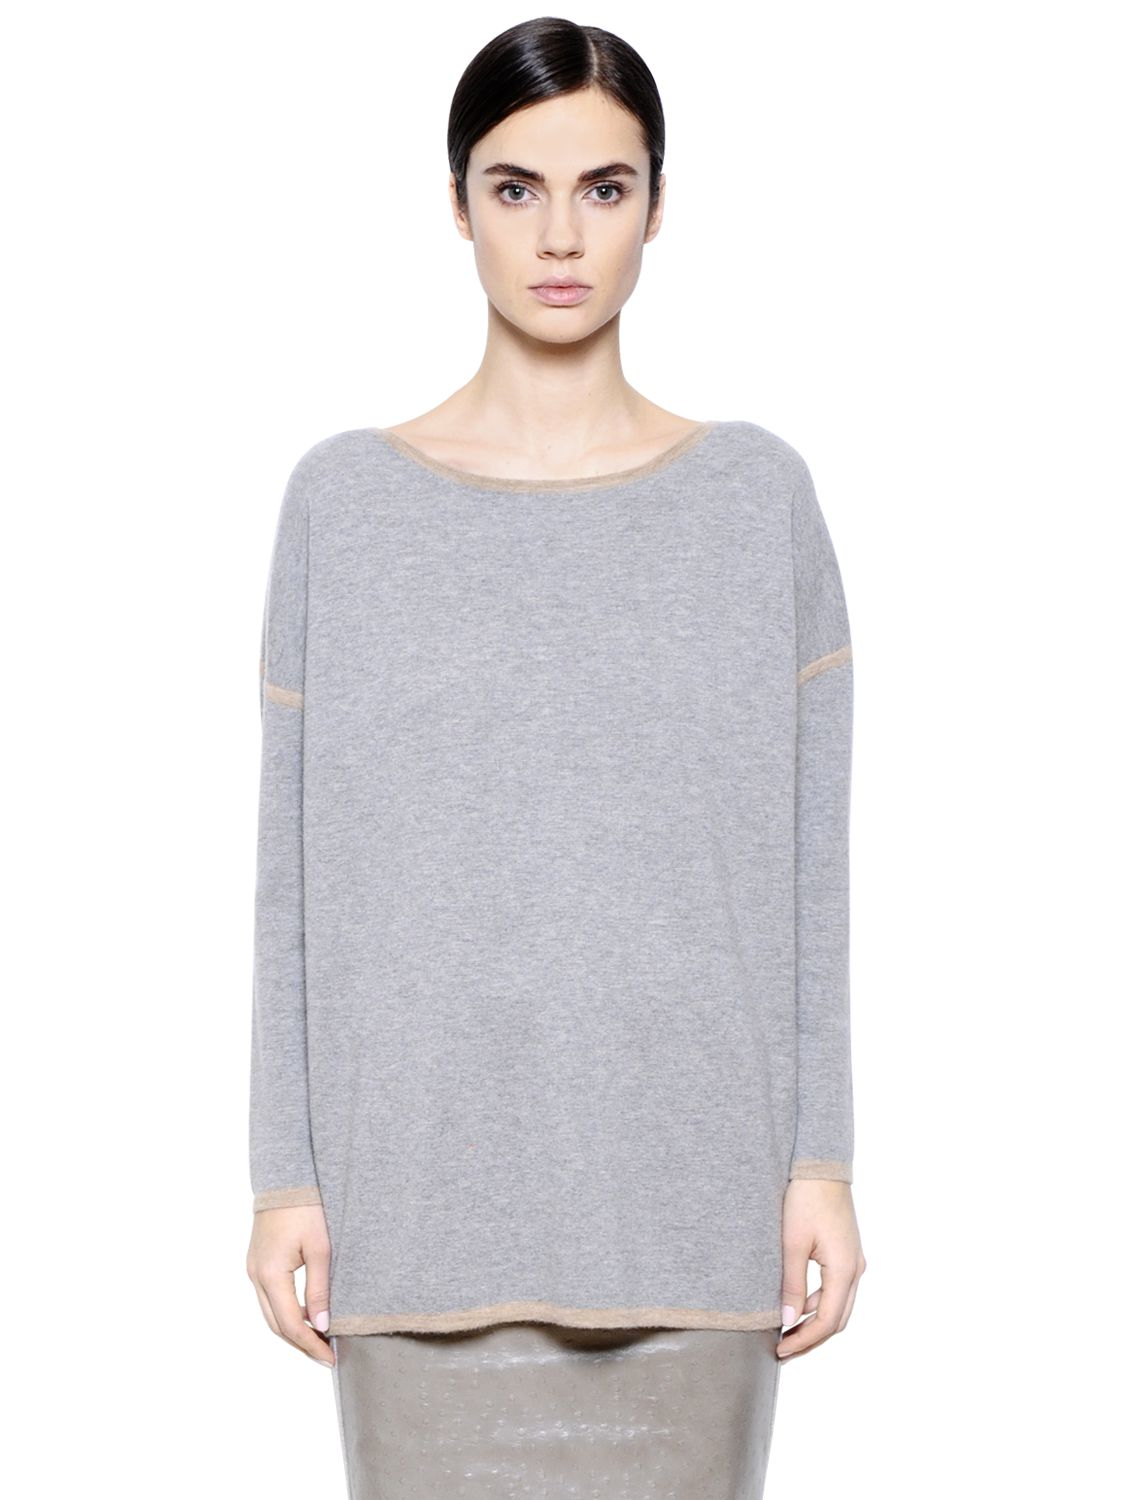 Lyst - Max Mara Contrast Detail Wool & Cashmere Sweater in Gray